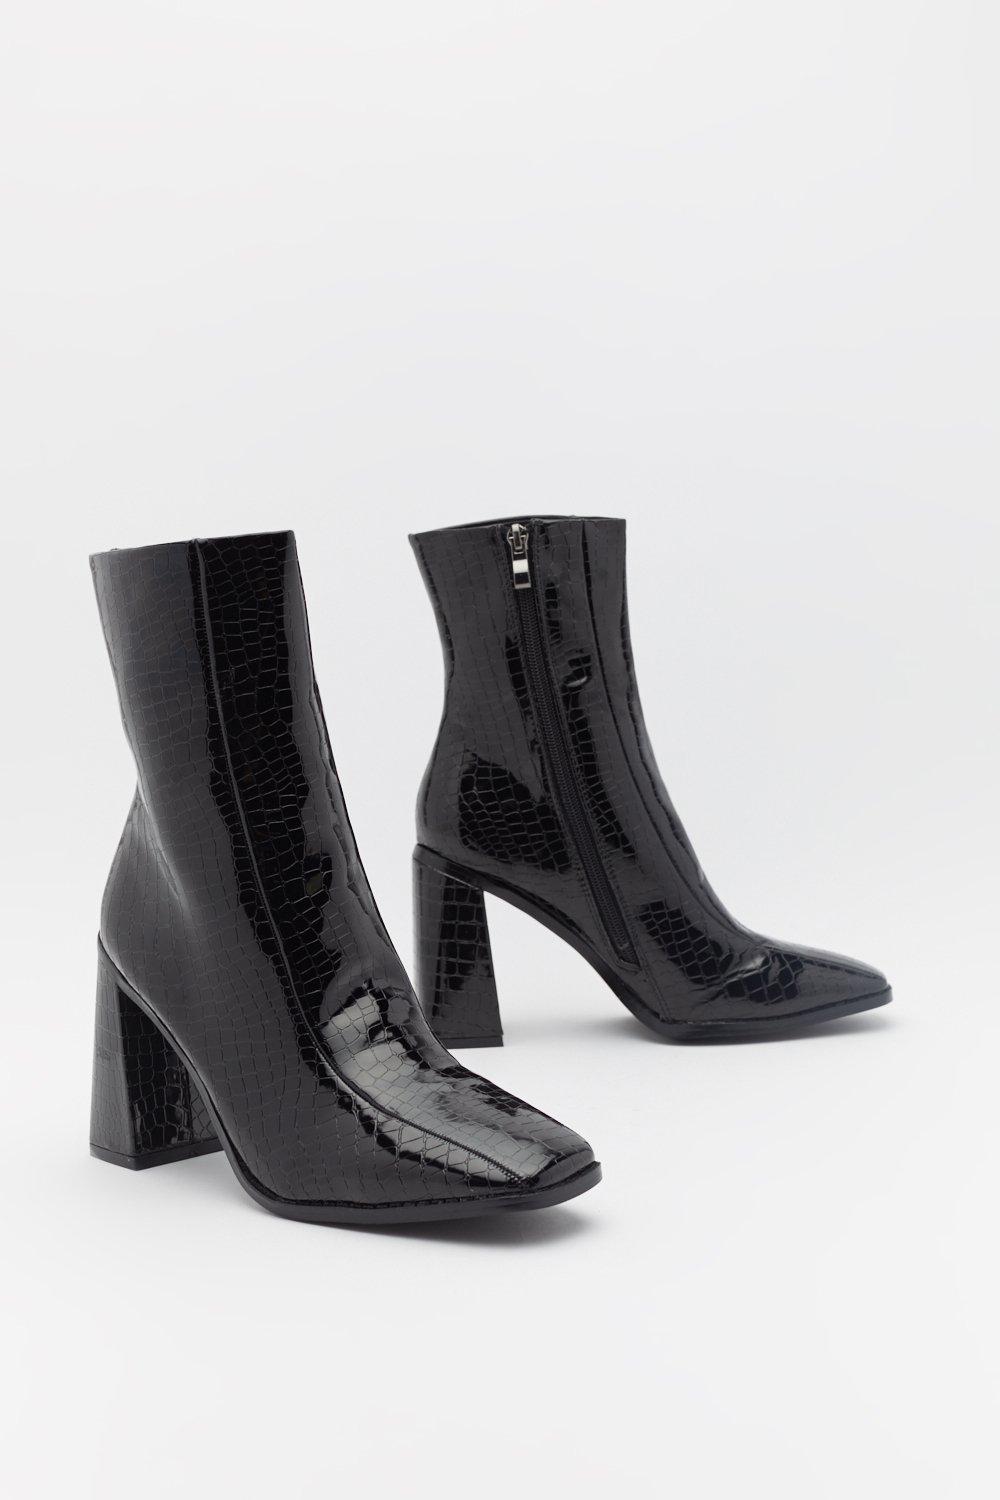 square toe heeled boots